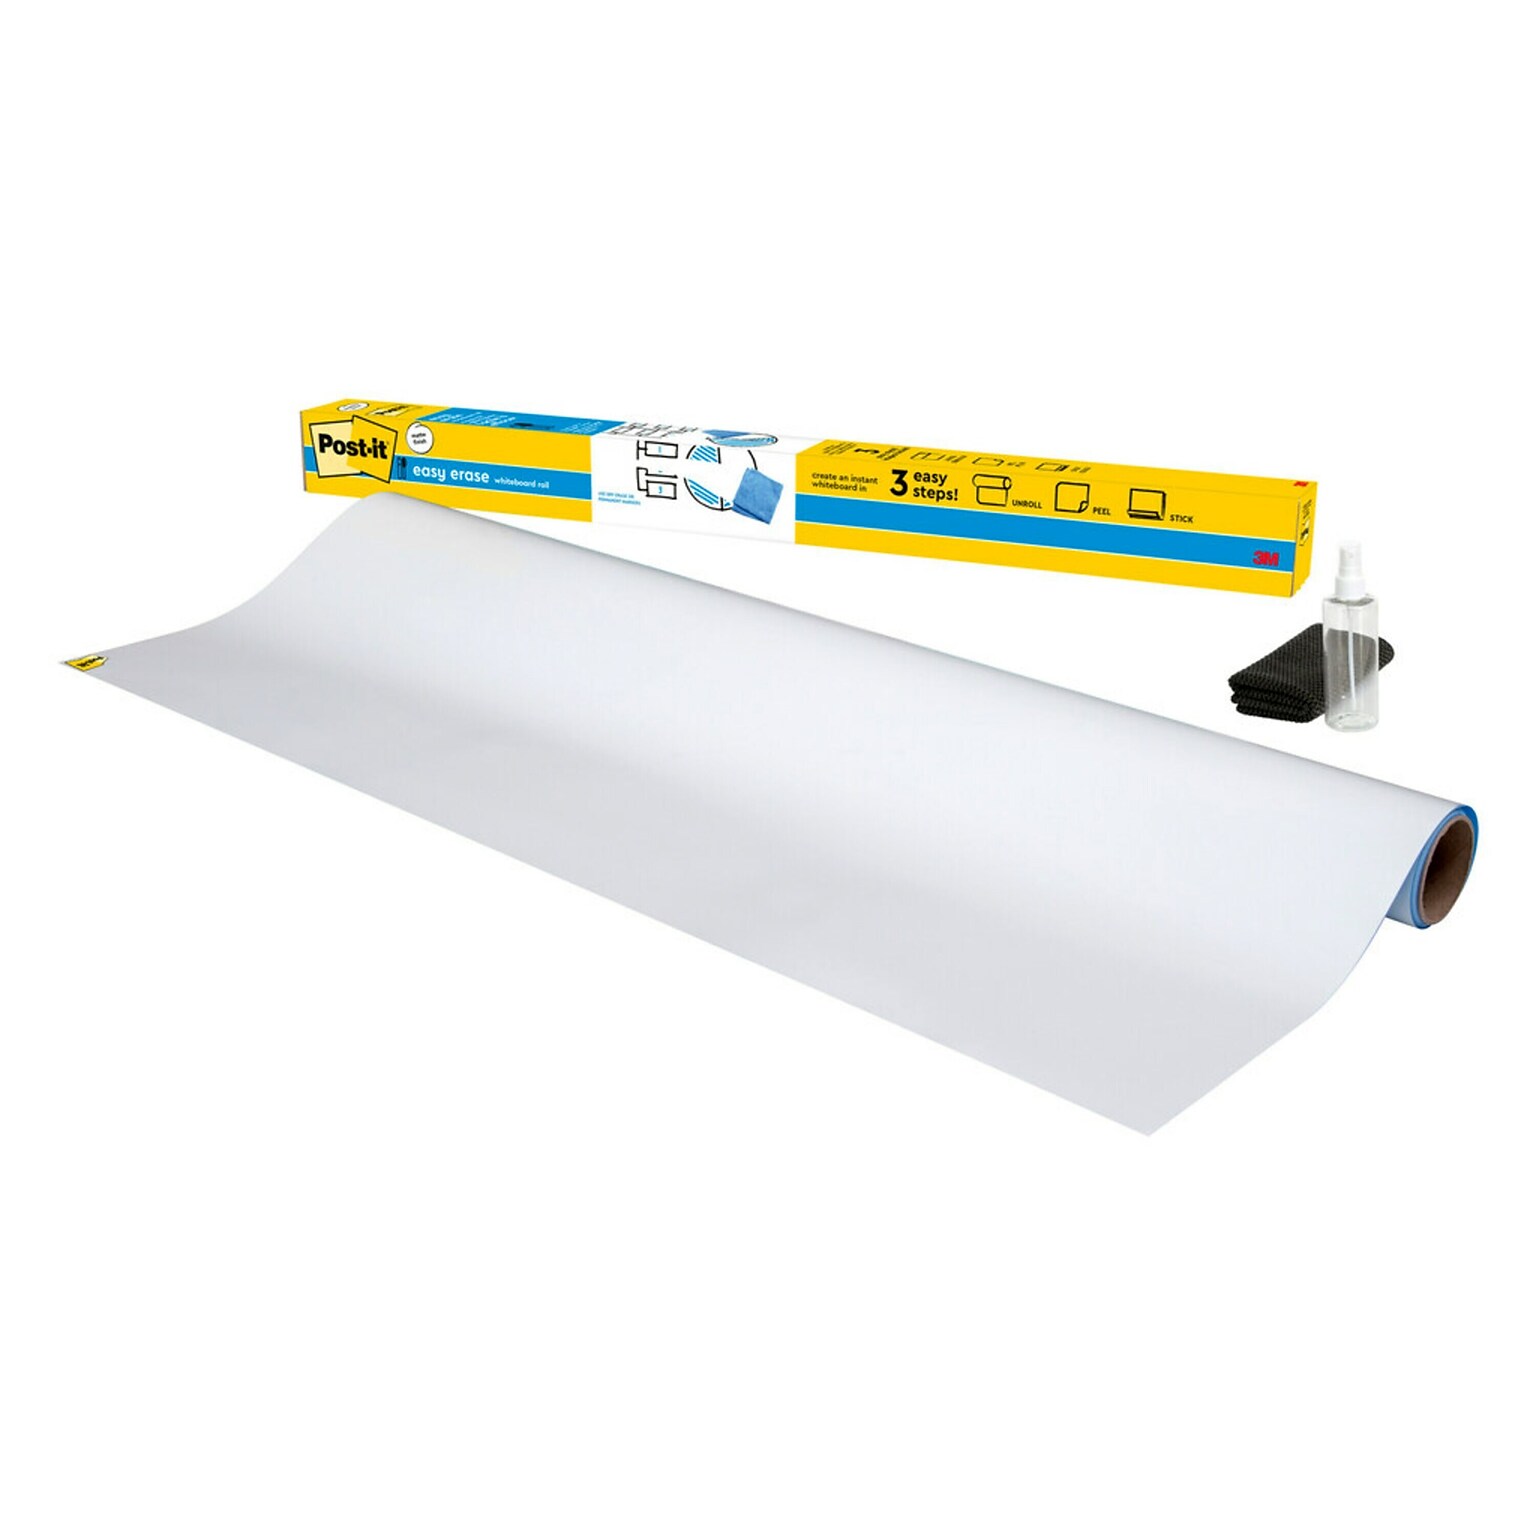 Post-it Flex Write Surface, 4 ft x 3 ft, Permanent Marker Wipes Away with Water, Permanent Marker Whiteboard Surface